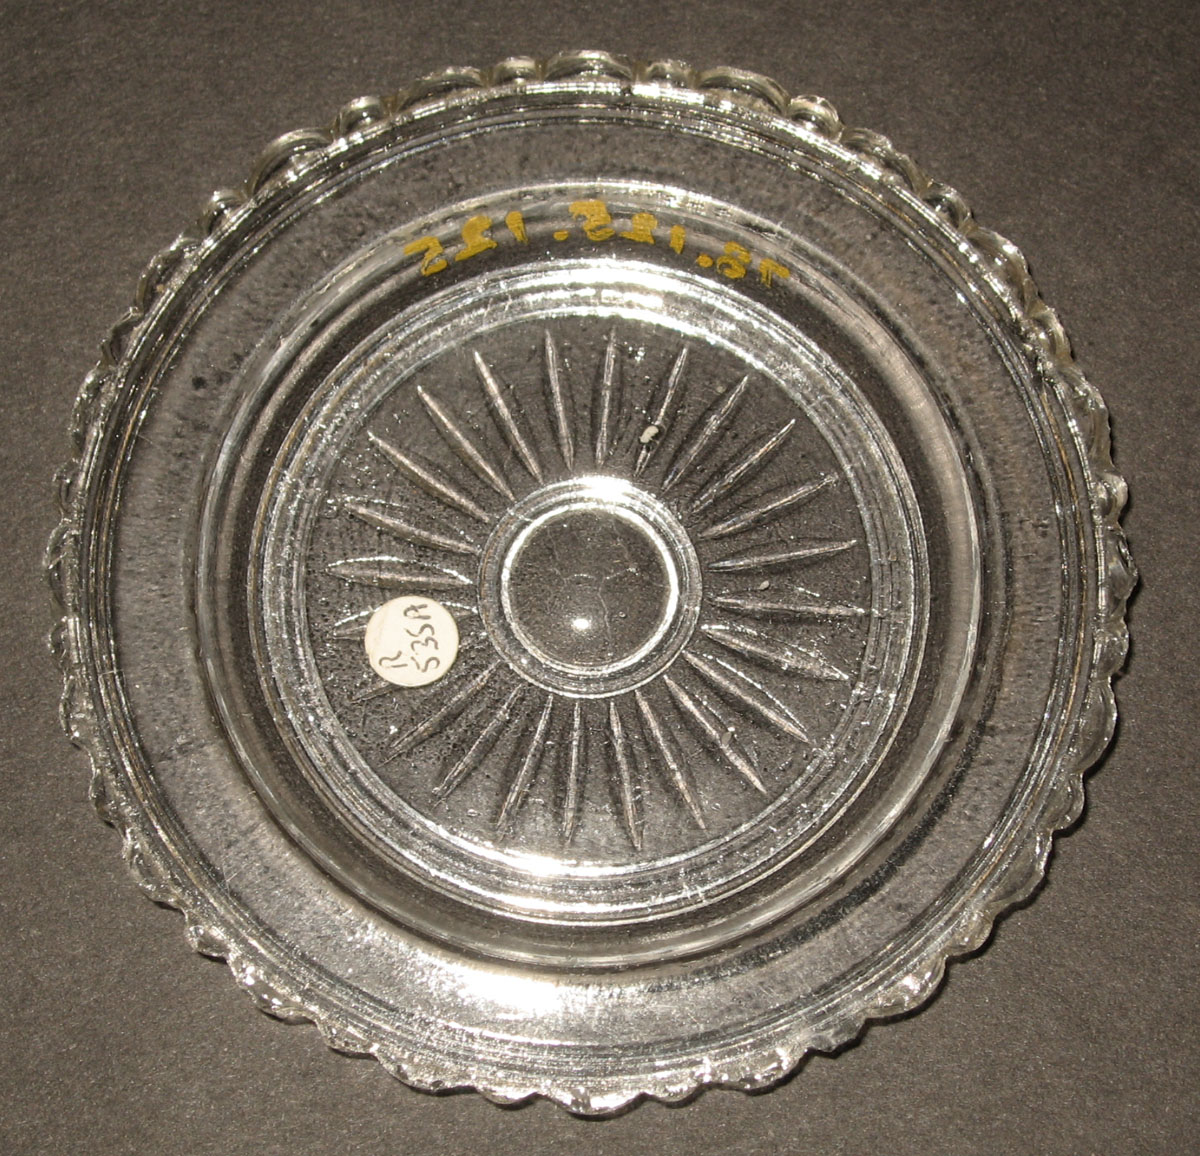 1978.0125.125 Glass cup plate